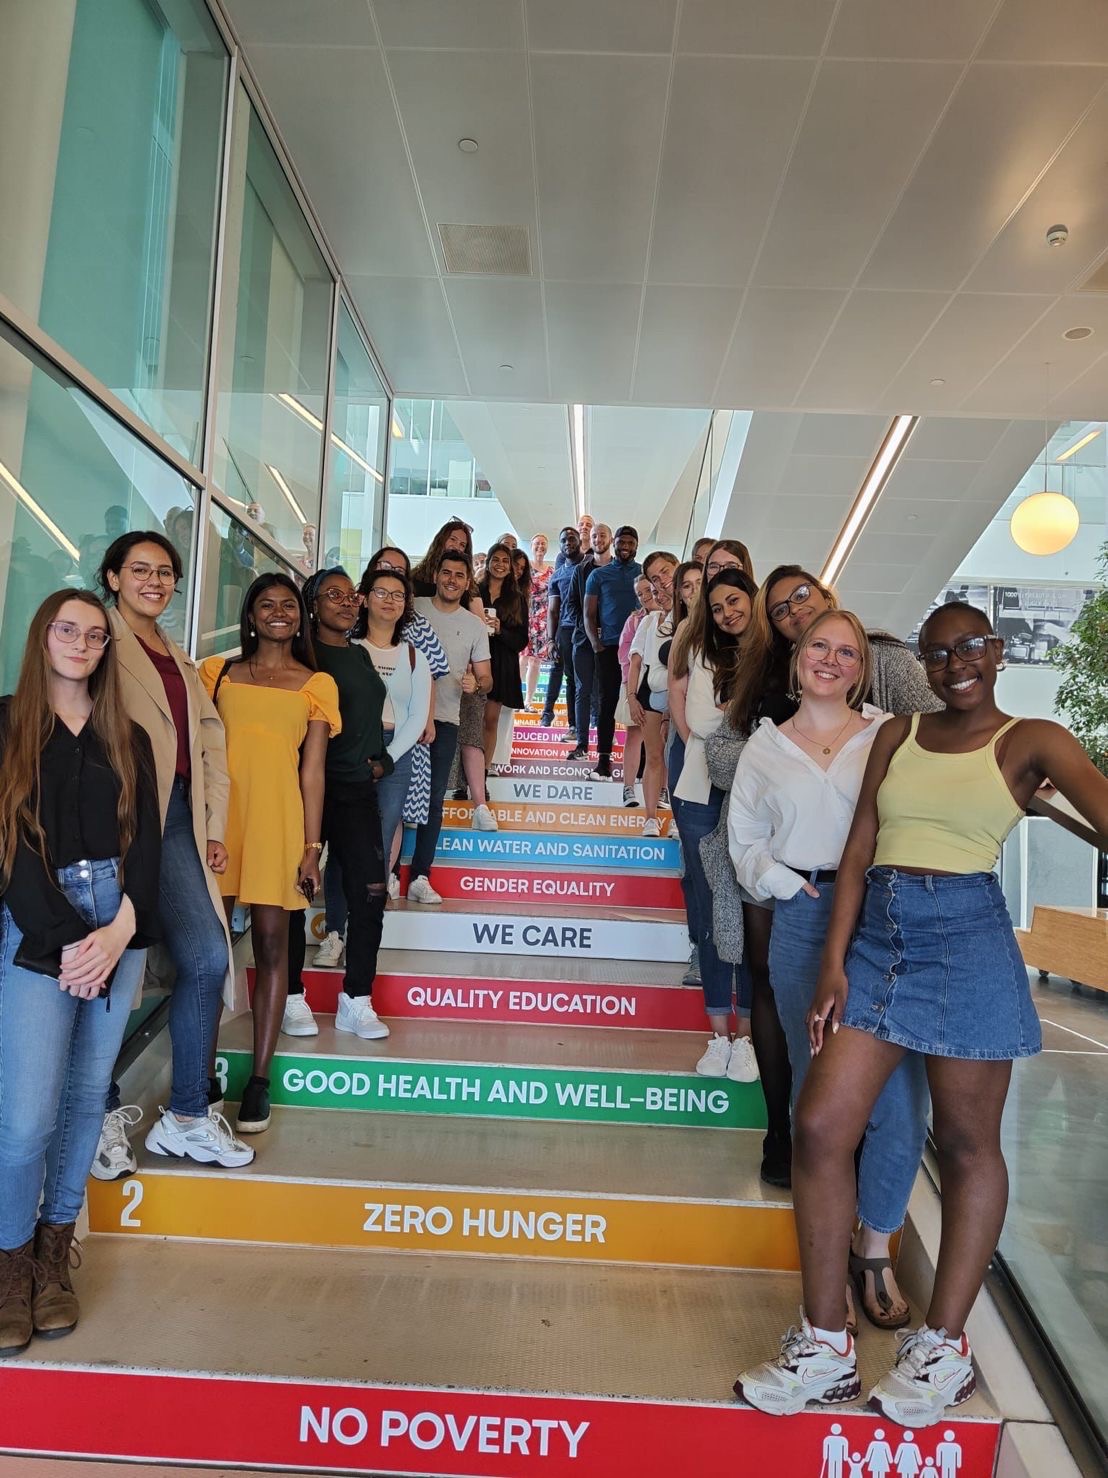 Students standing together next to the staircase decorated with UN sustainable development goals